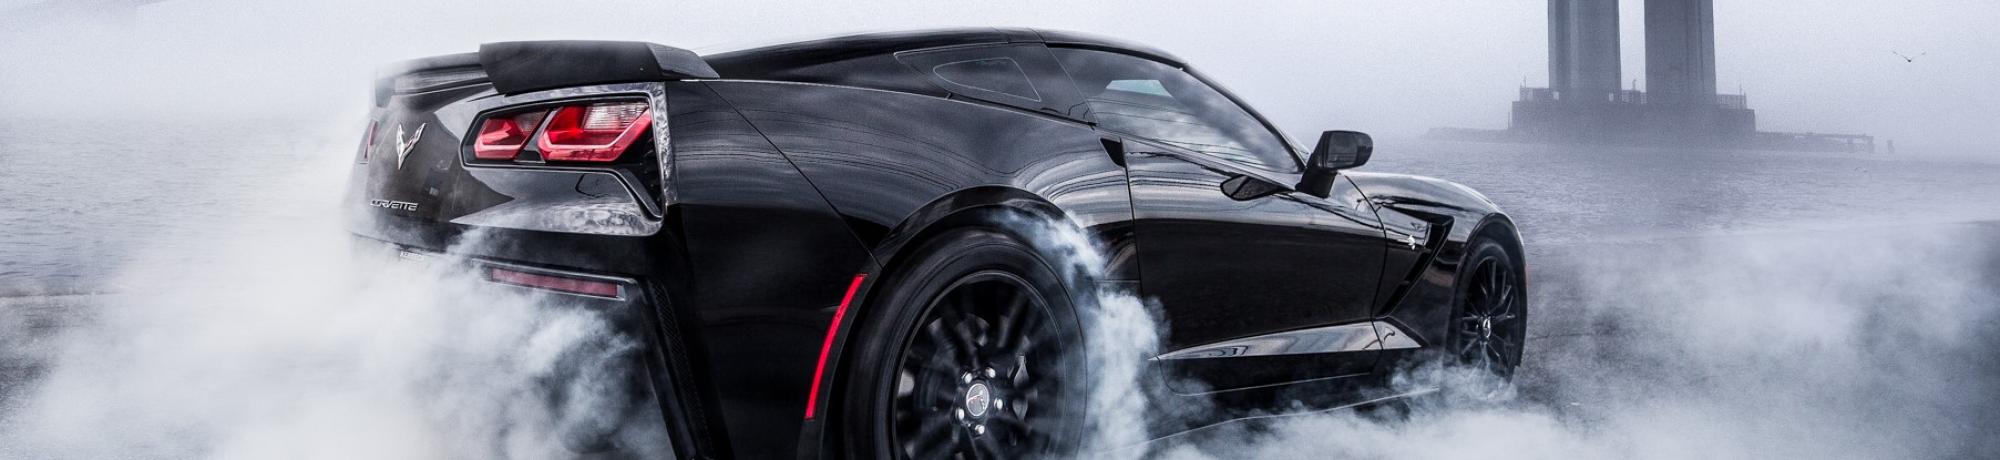 "C7 Corvette Burnout" by Taylor Robinson Photo is marked with CC BY-NC-ND 2.0.